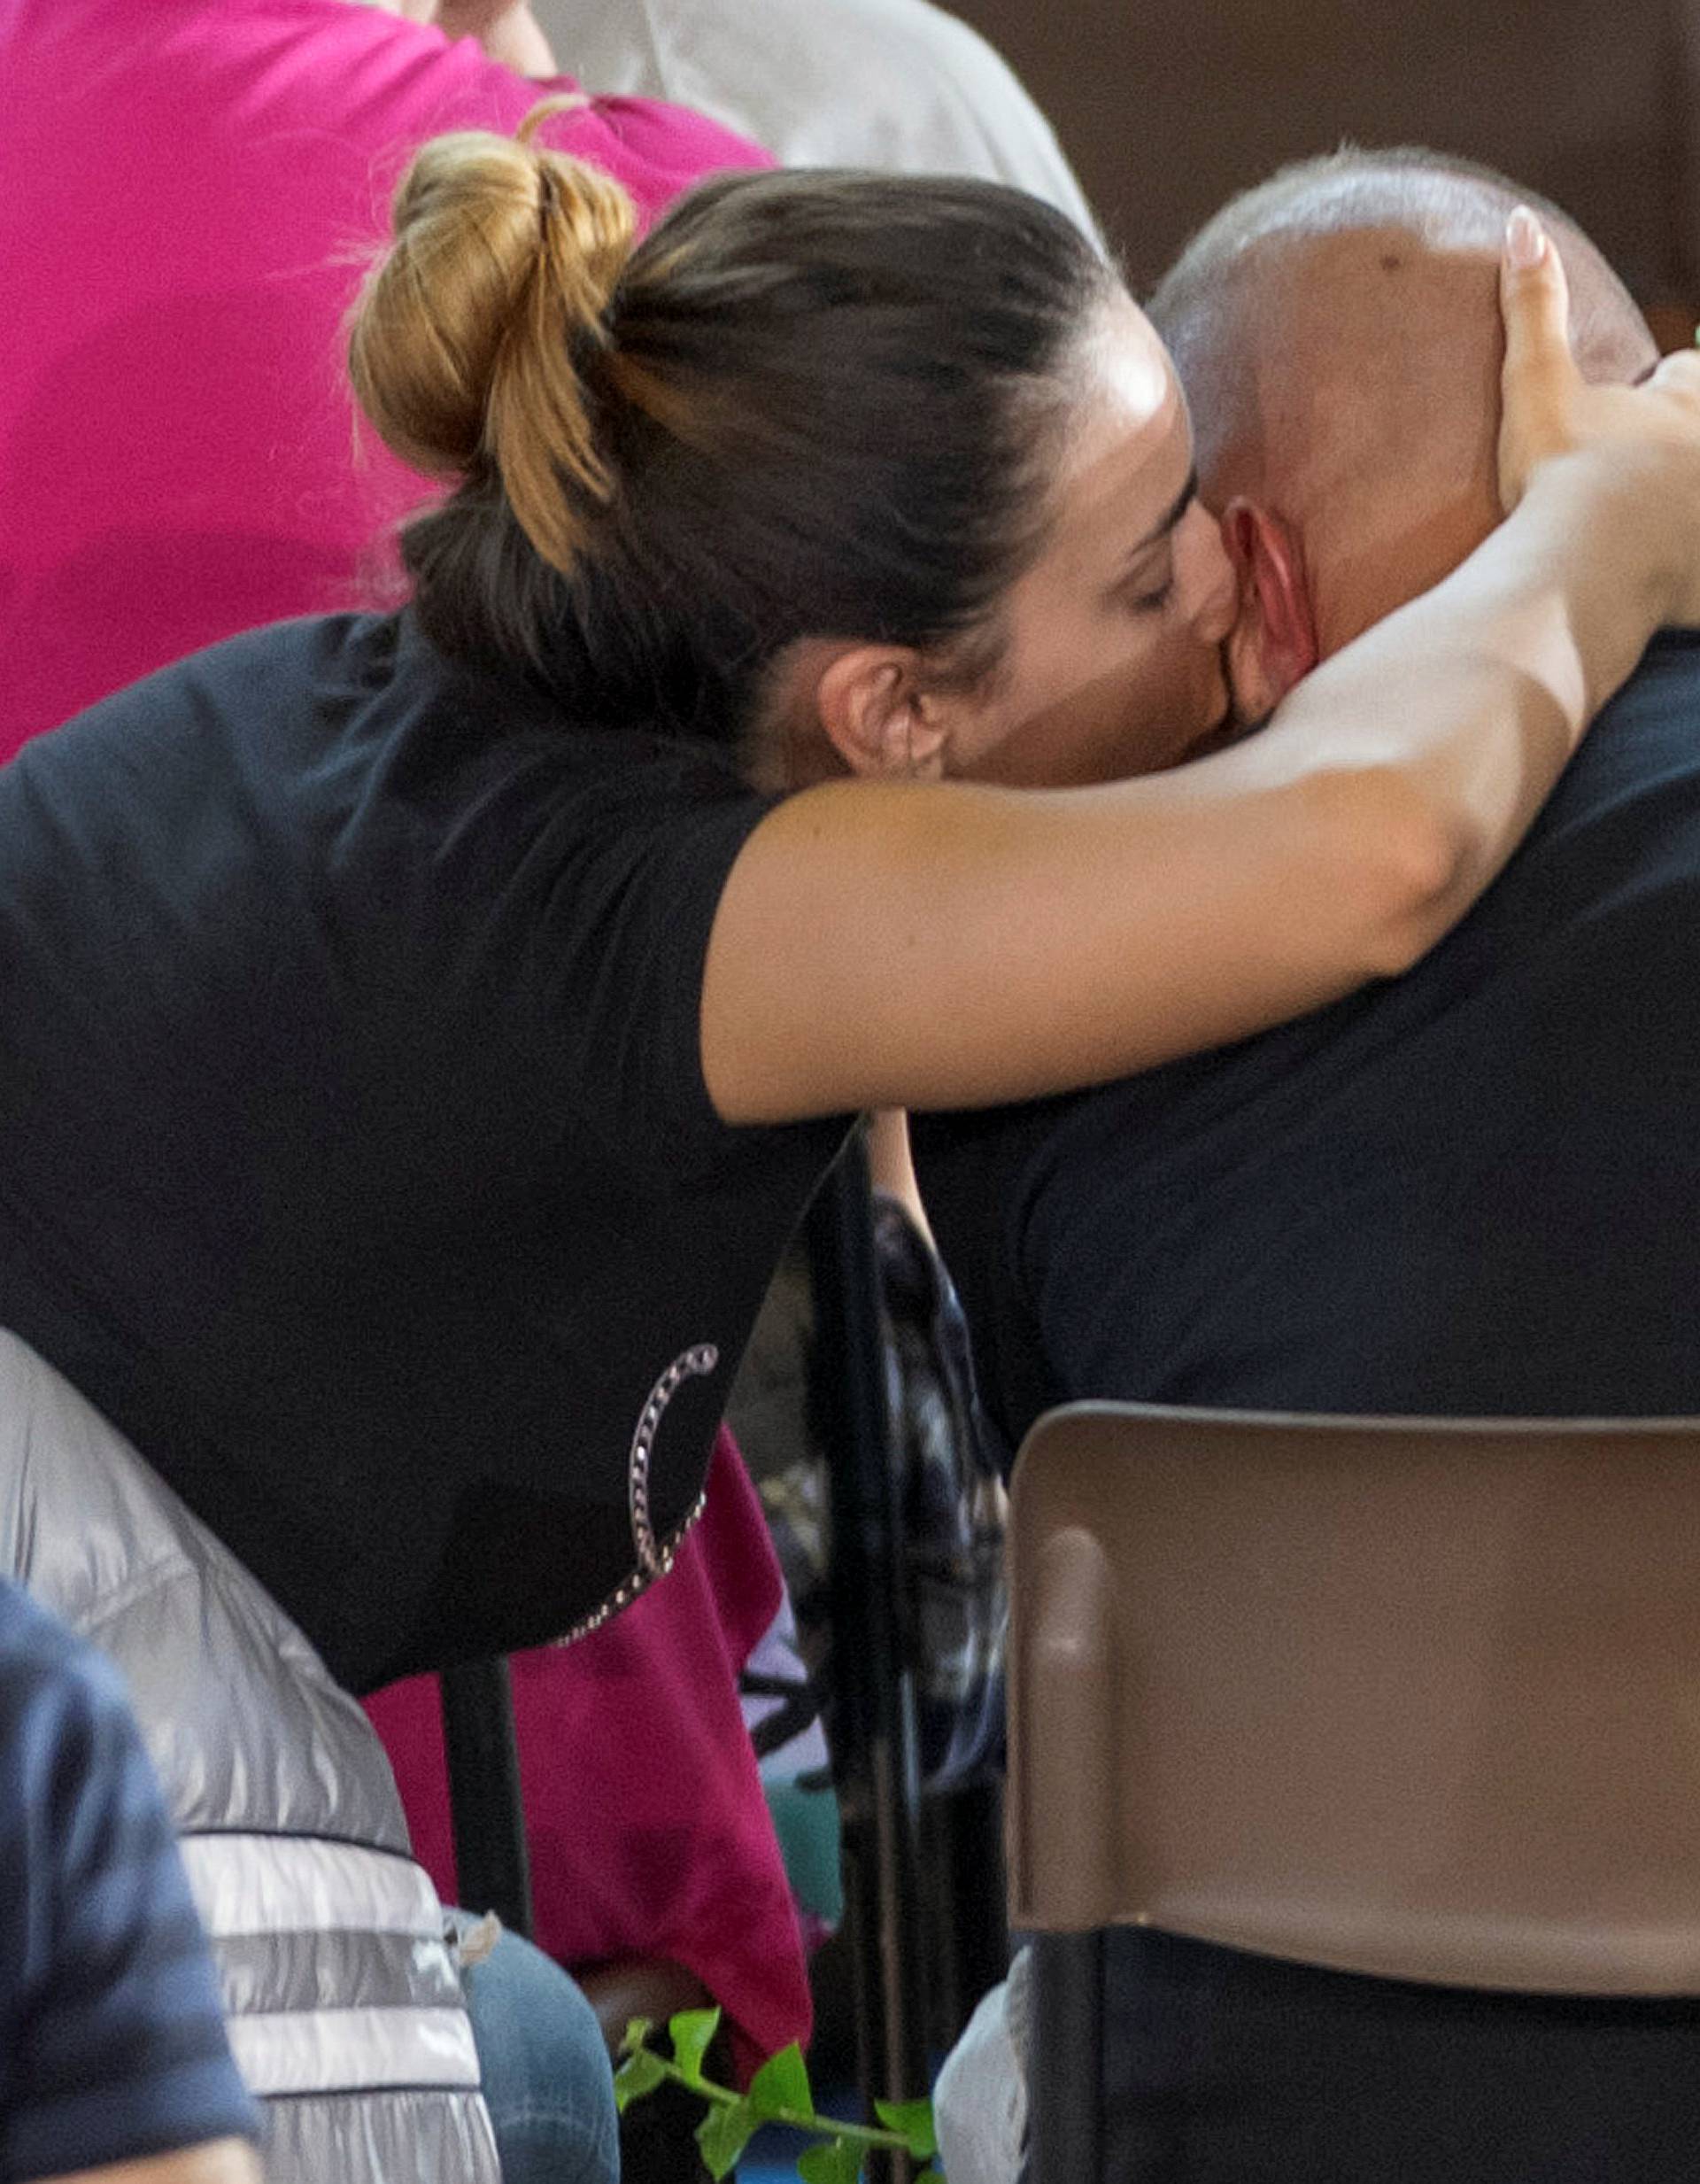 A woman kisses and hugs a man during the funeral service for victims of the earthquake inside a gym in Ascoli Piceno